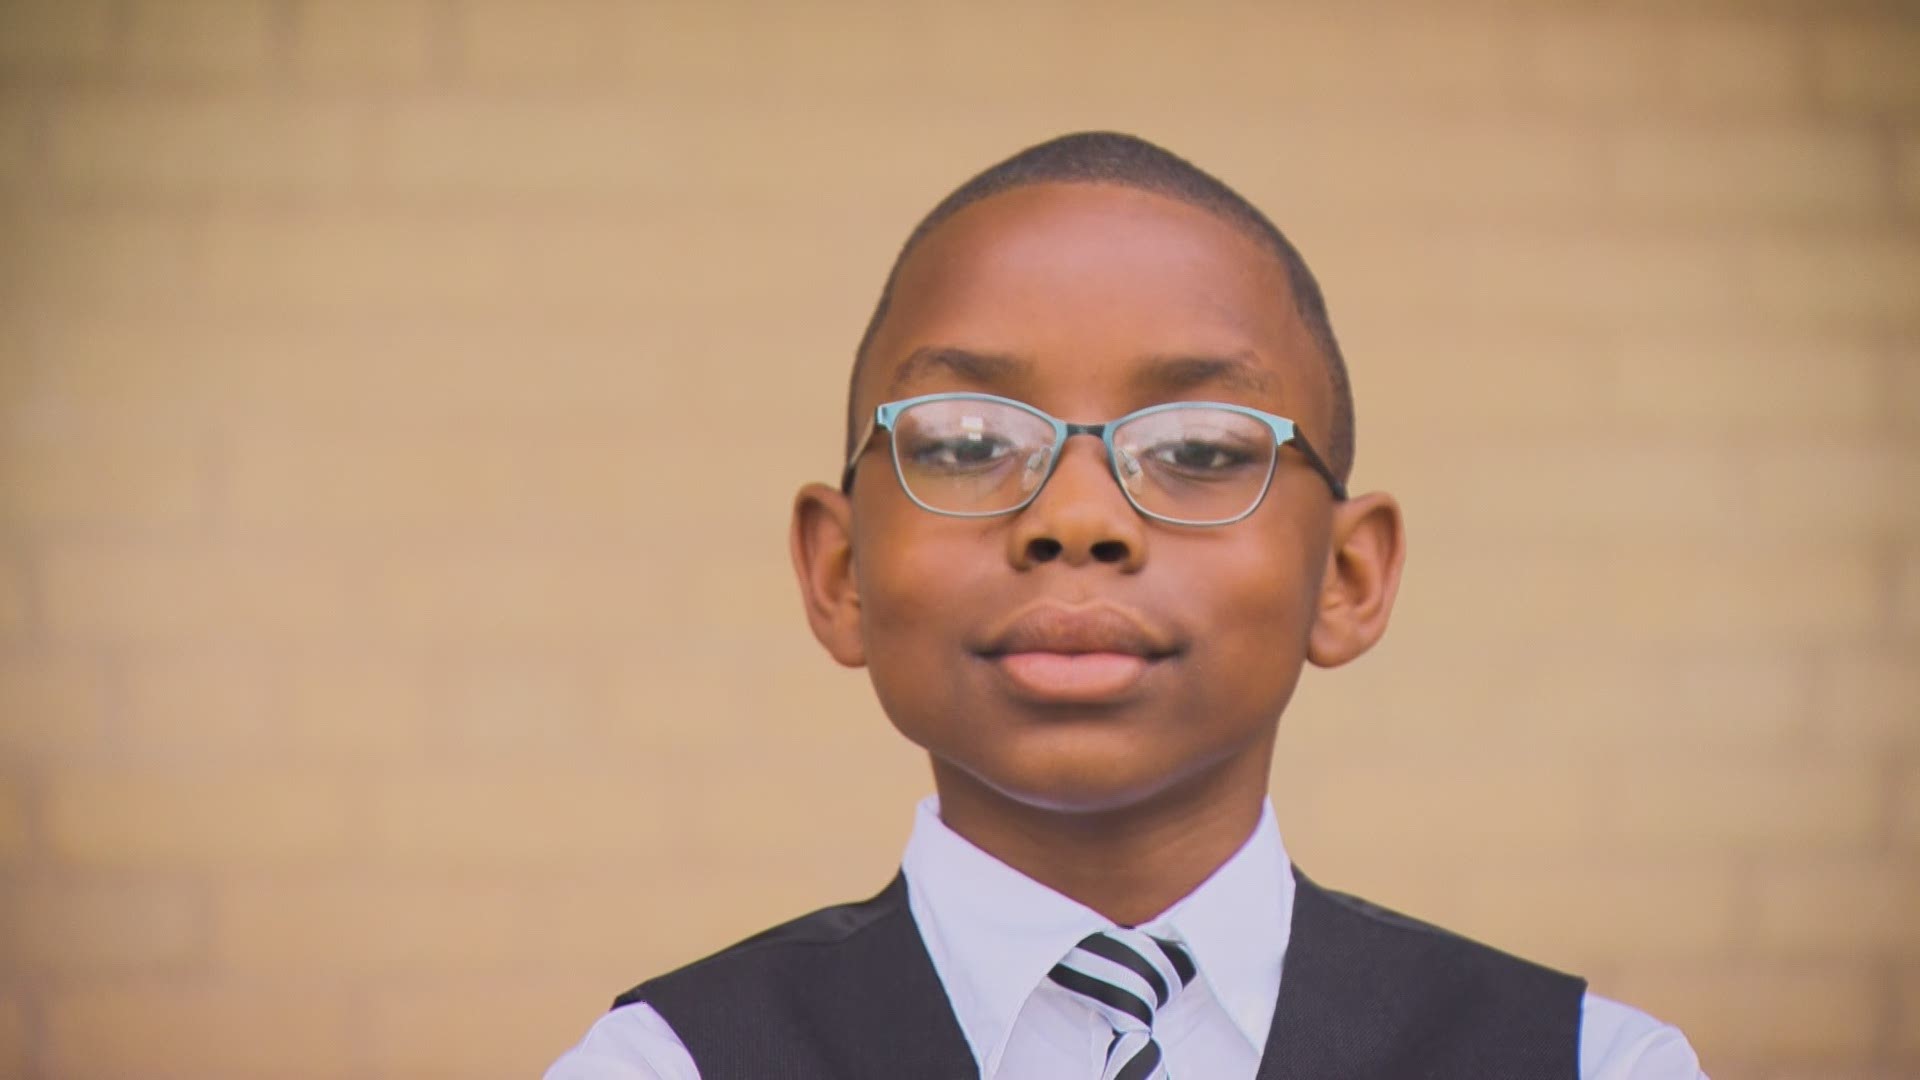 Elijah Robertson, 10, said he couldn't find books he enjoyed reading in his school library. So, he decided to write his own books.